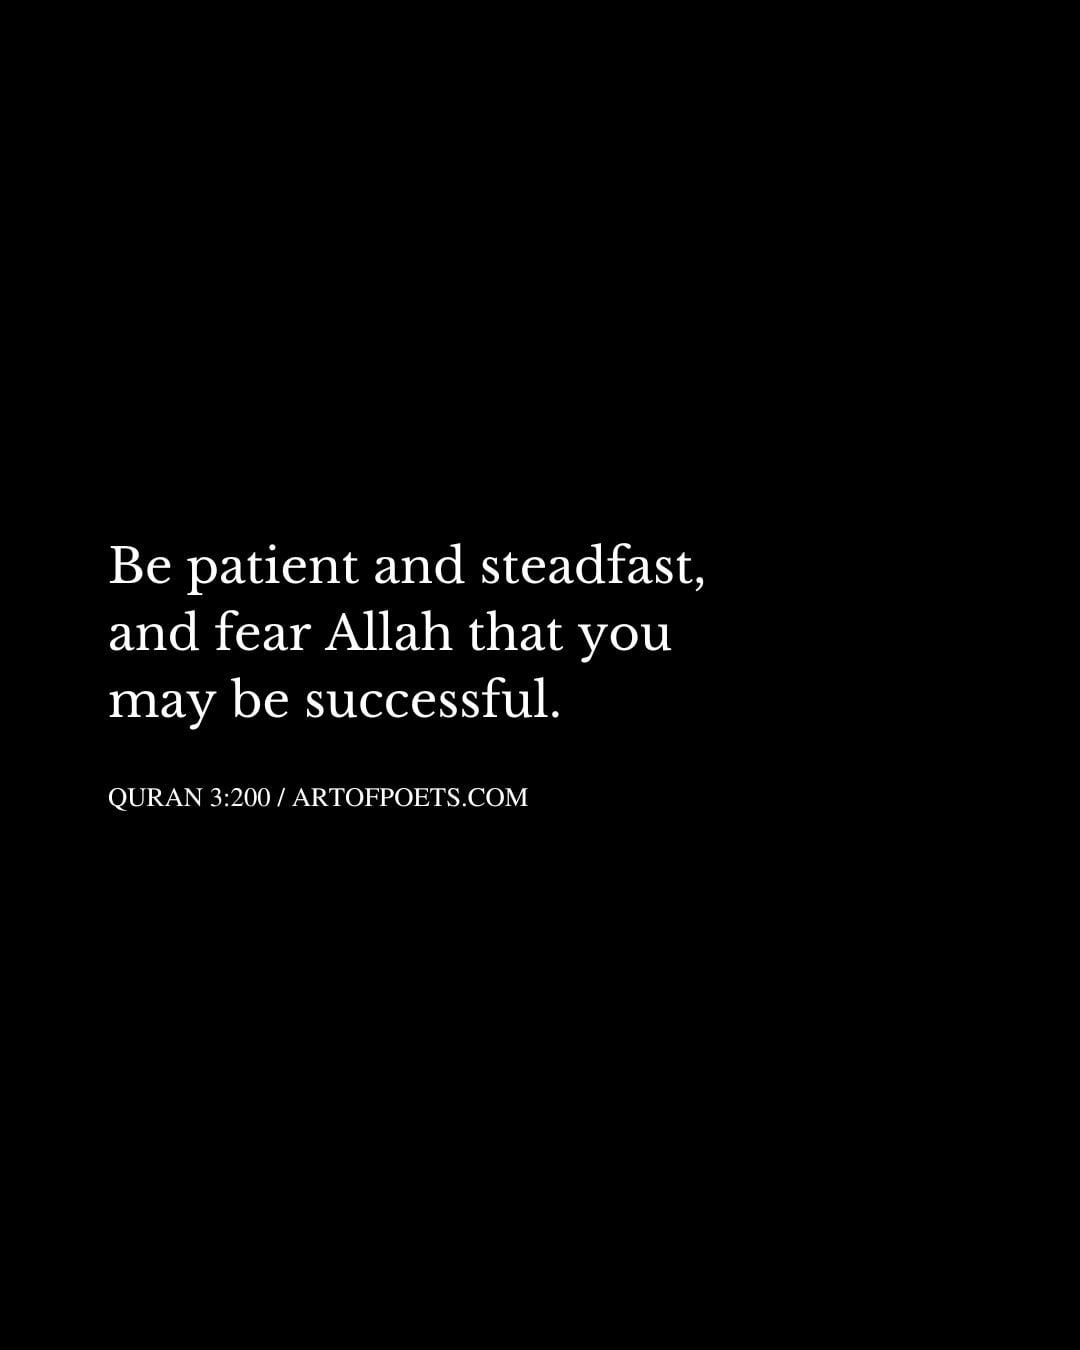 Be patient and steadfast and fear Allah that you may be successful